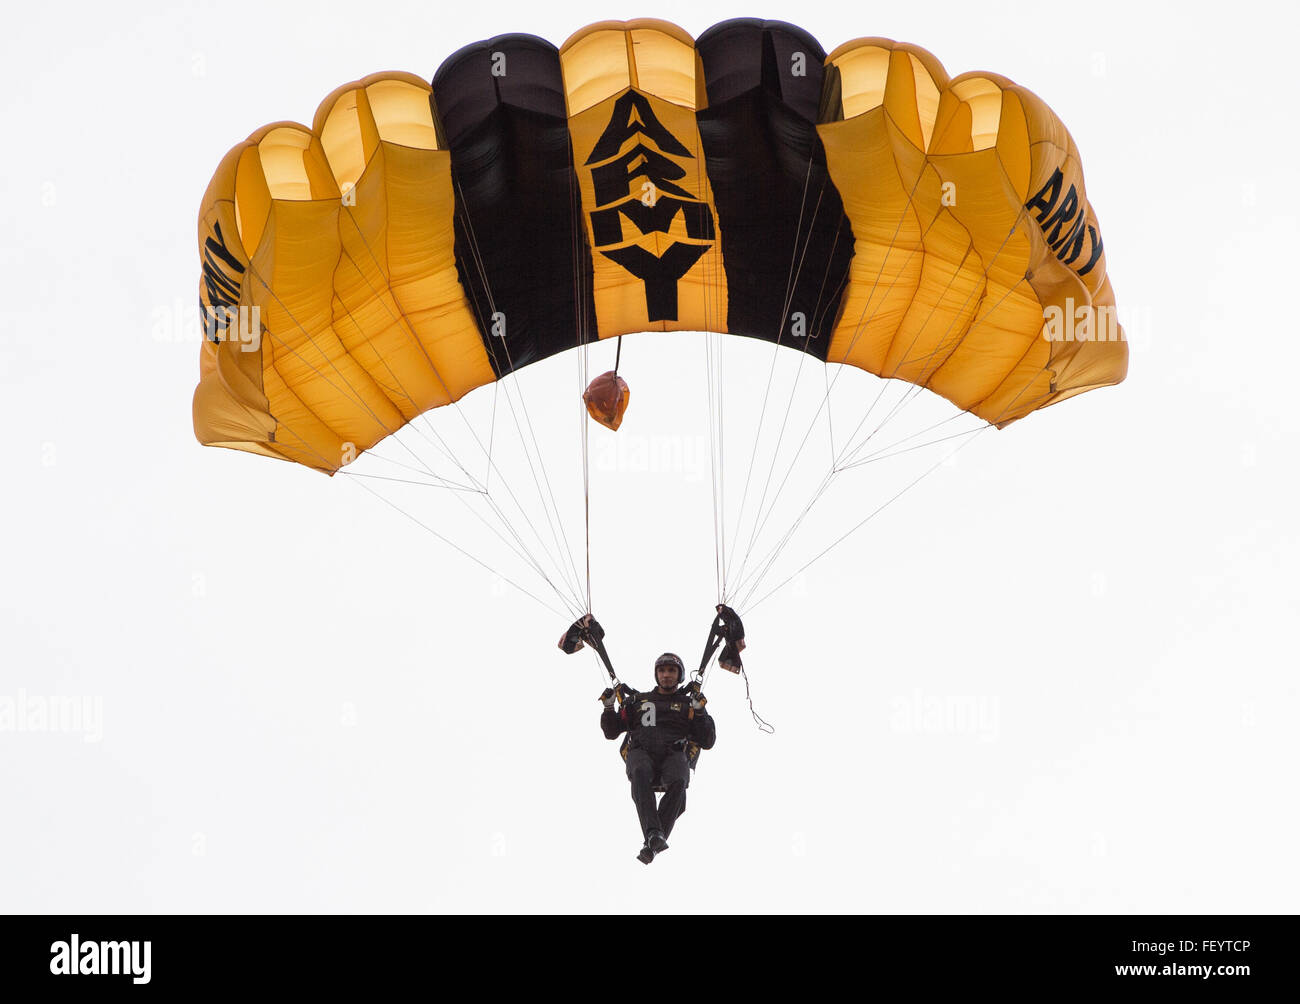 A U.S. Army Special Operations Forces parachute team member descends toward Luzon Drop Zone during the 18th Annual Randy Oler Memorial Operation Toy Drop, hosted by U.S. Army Civil Affairs & Psychological Operations Command (Airborne) at Camp Mackall, N.C., Dec. 7, 2015. Operation Toy Drop is the world's largest combined airborne operation and provides soldiers the opportunity to help children in need receive toys for the holidays. Stock Photo